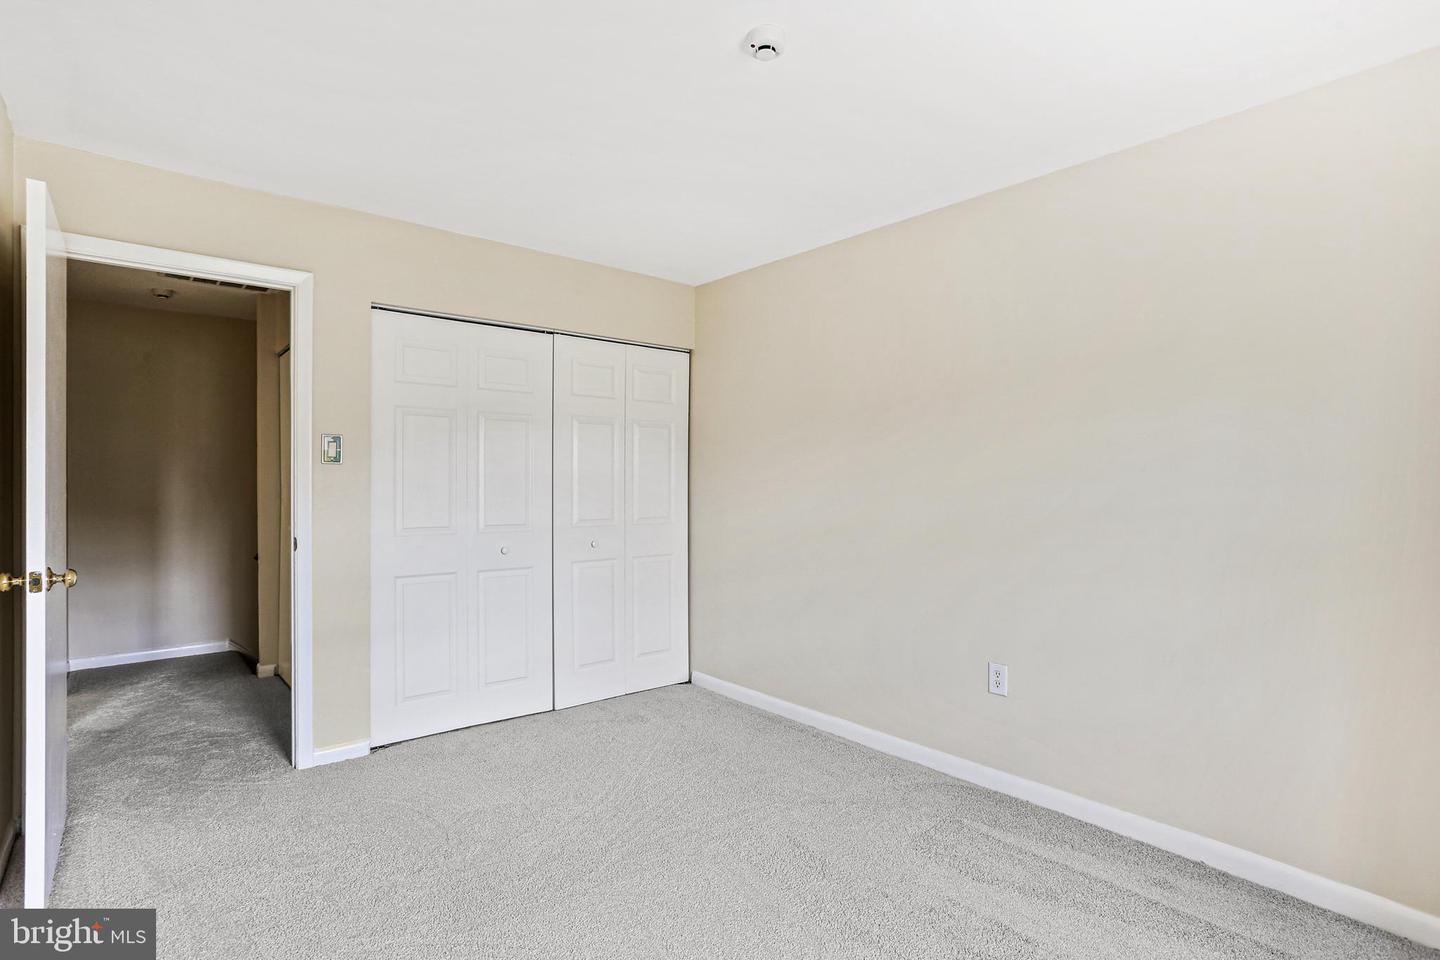 Photo 16 of 23 of 9220 Bridle Path Ln #L townhome